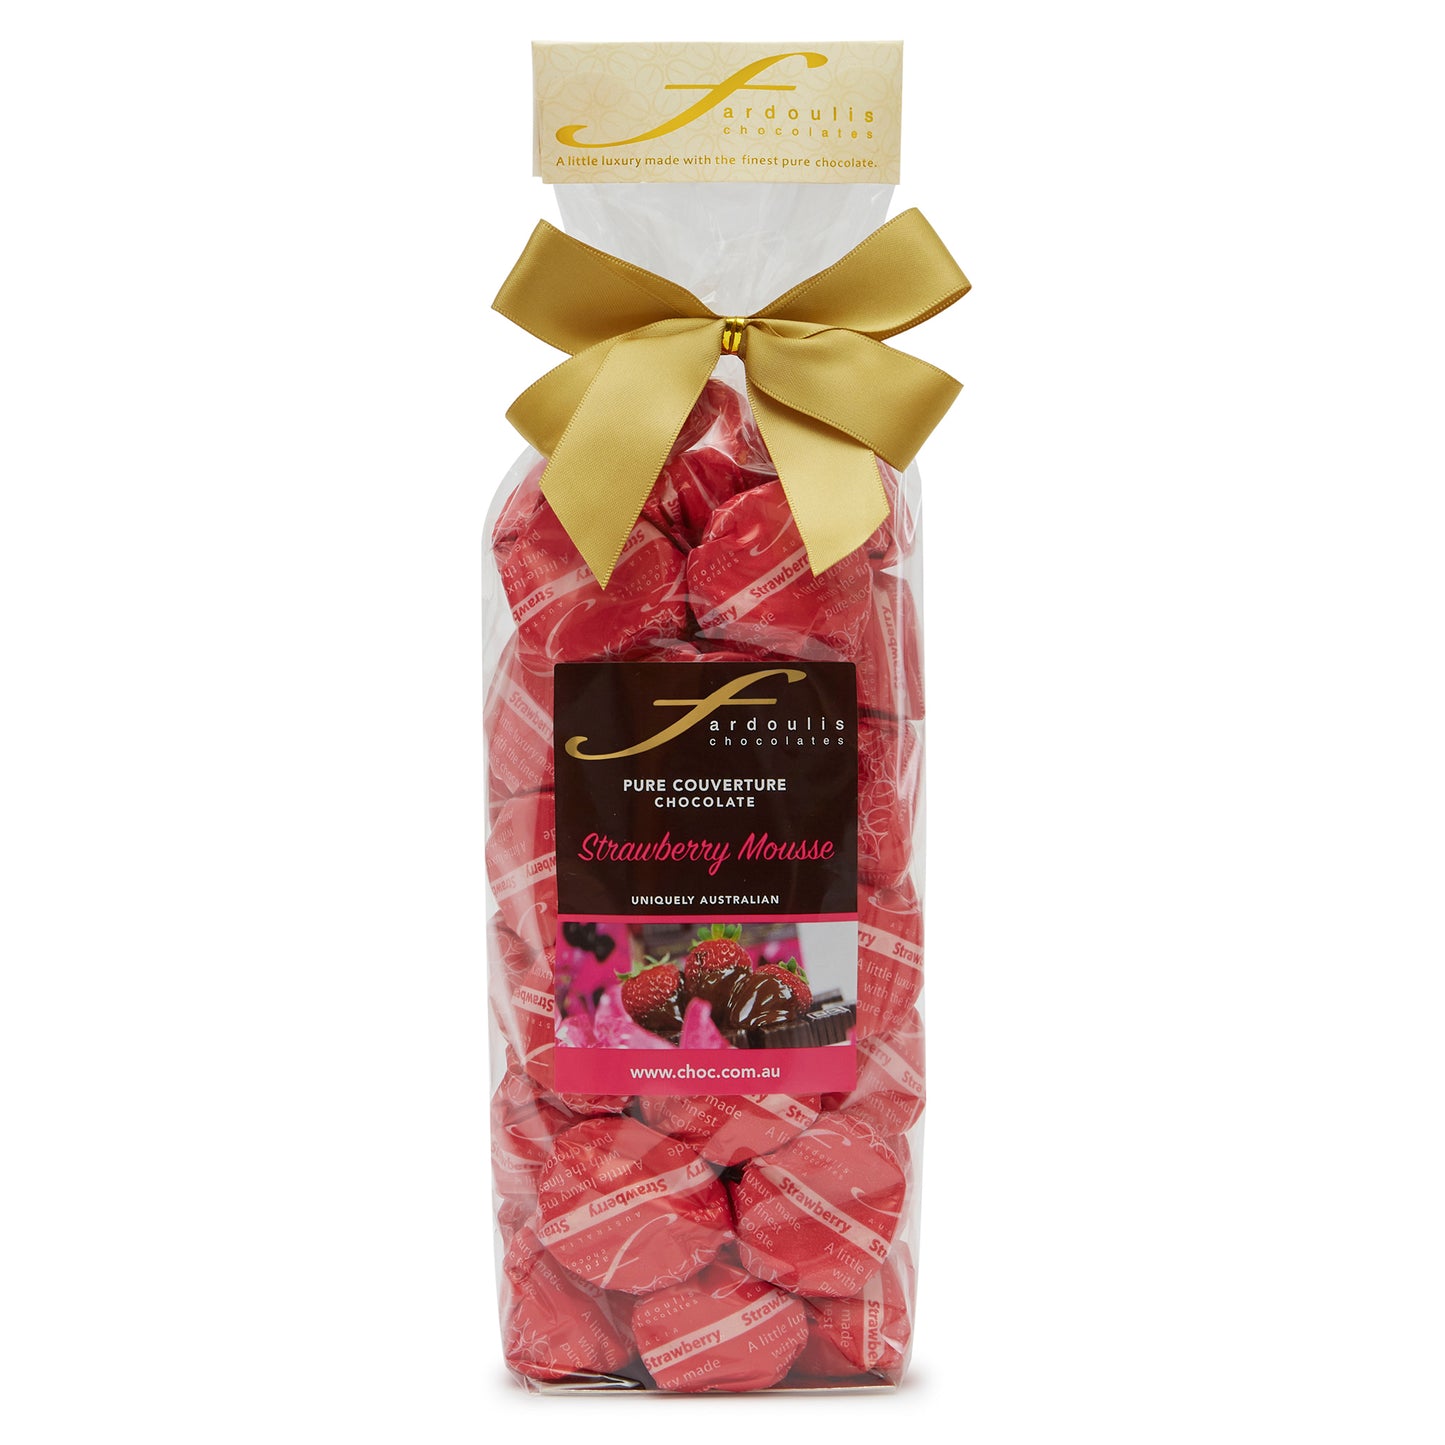 Strawberry Mousse 250g